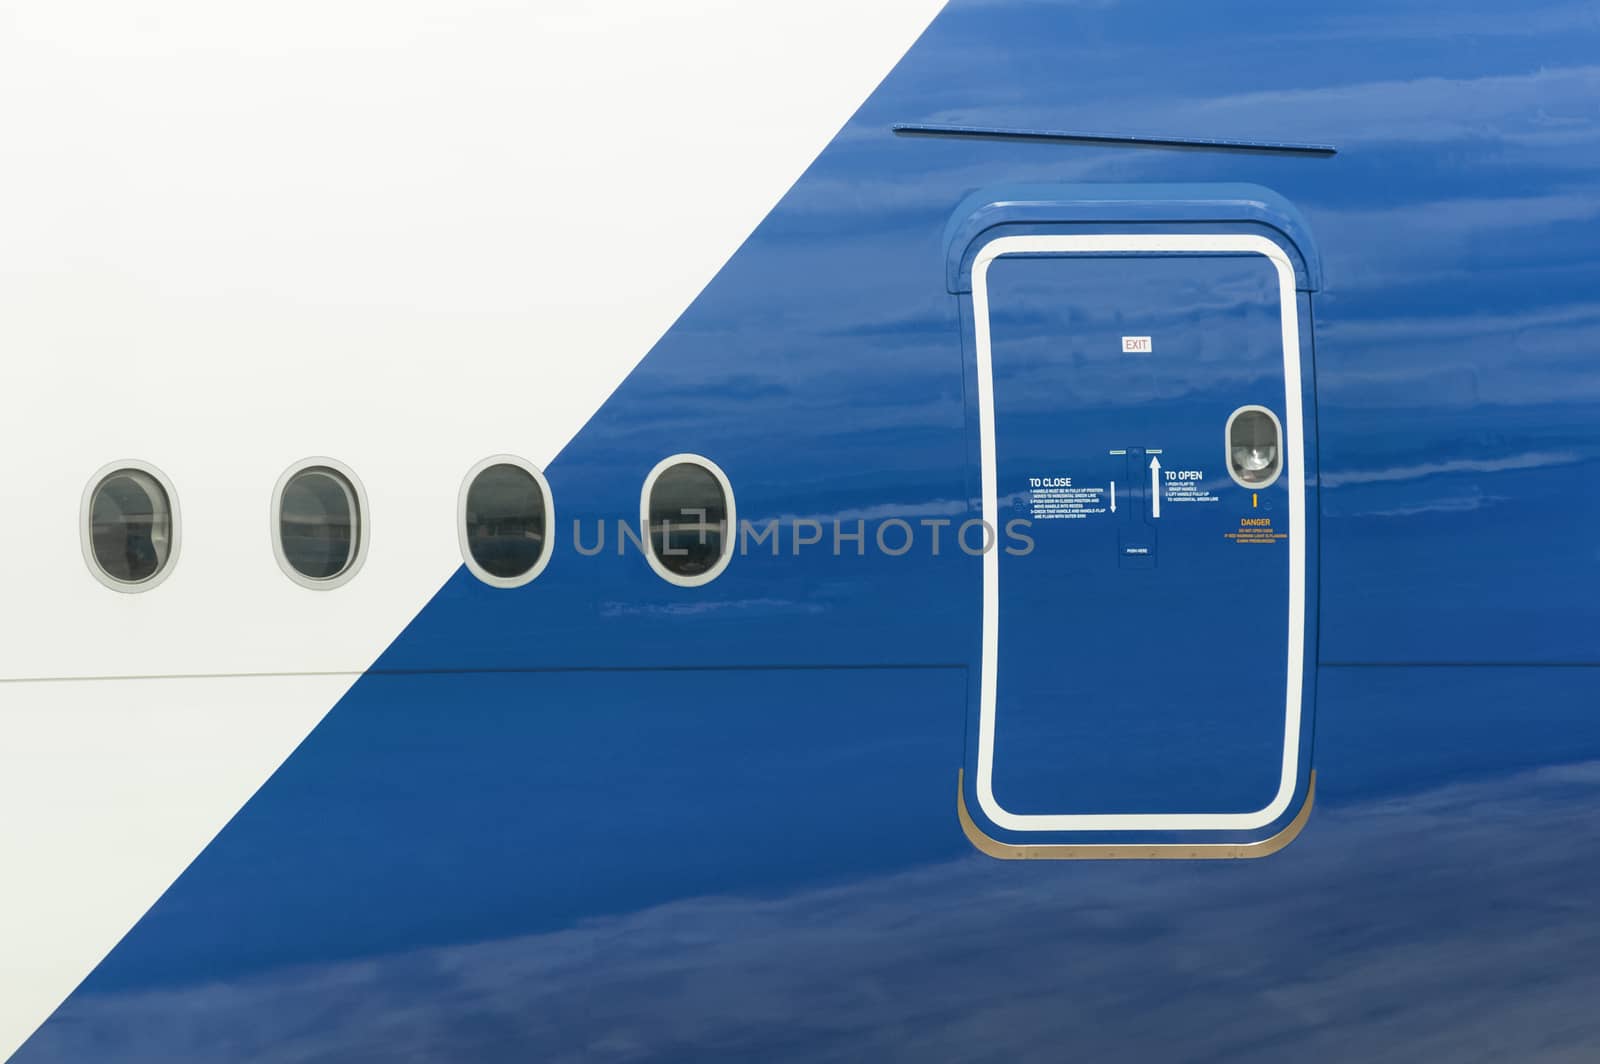 emergency exit and windows on the fuselage of a passenger aircraft